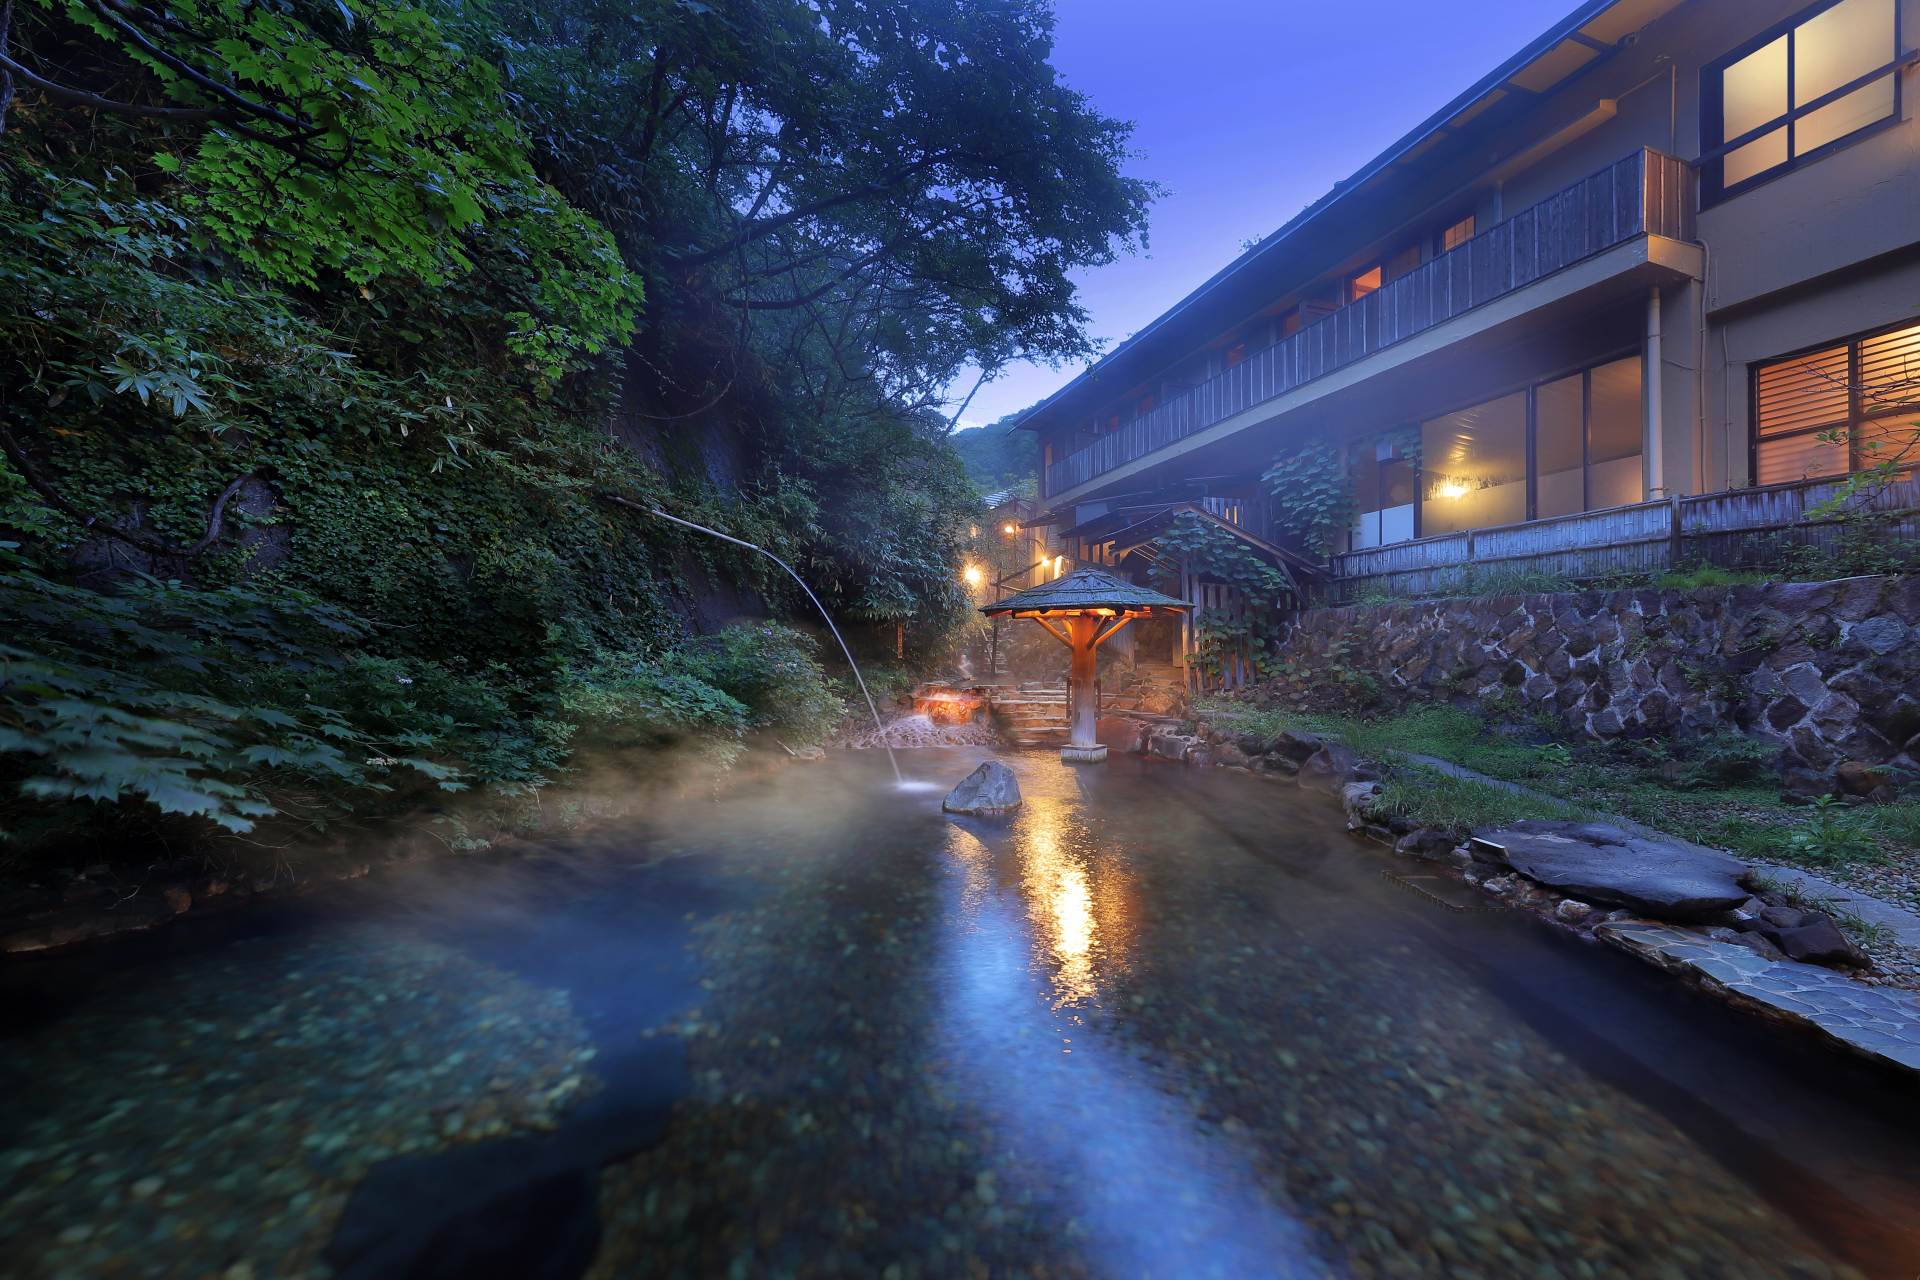 A hot spring inn resort perched in the heavens, some 1,300 meters above sea level.